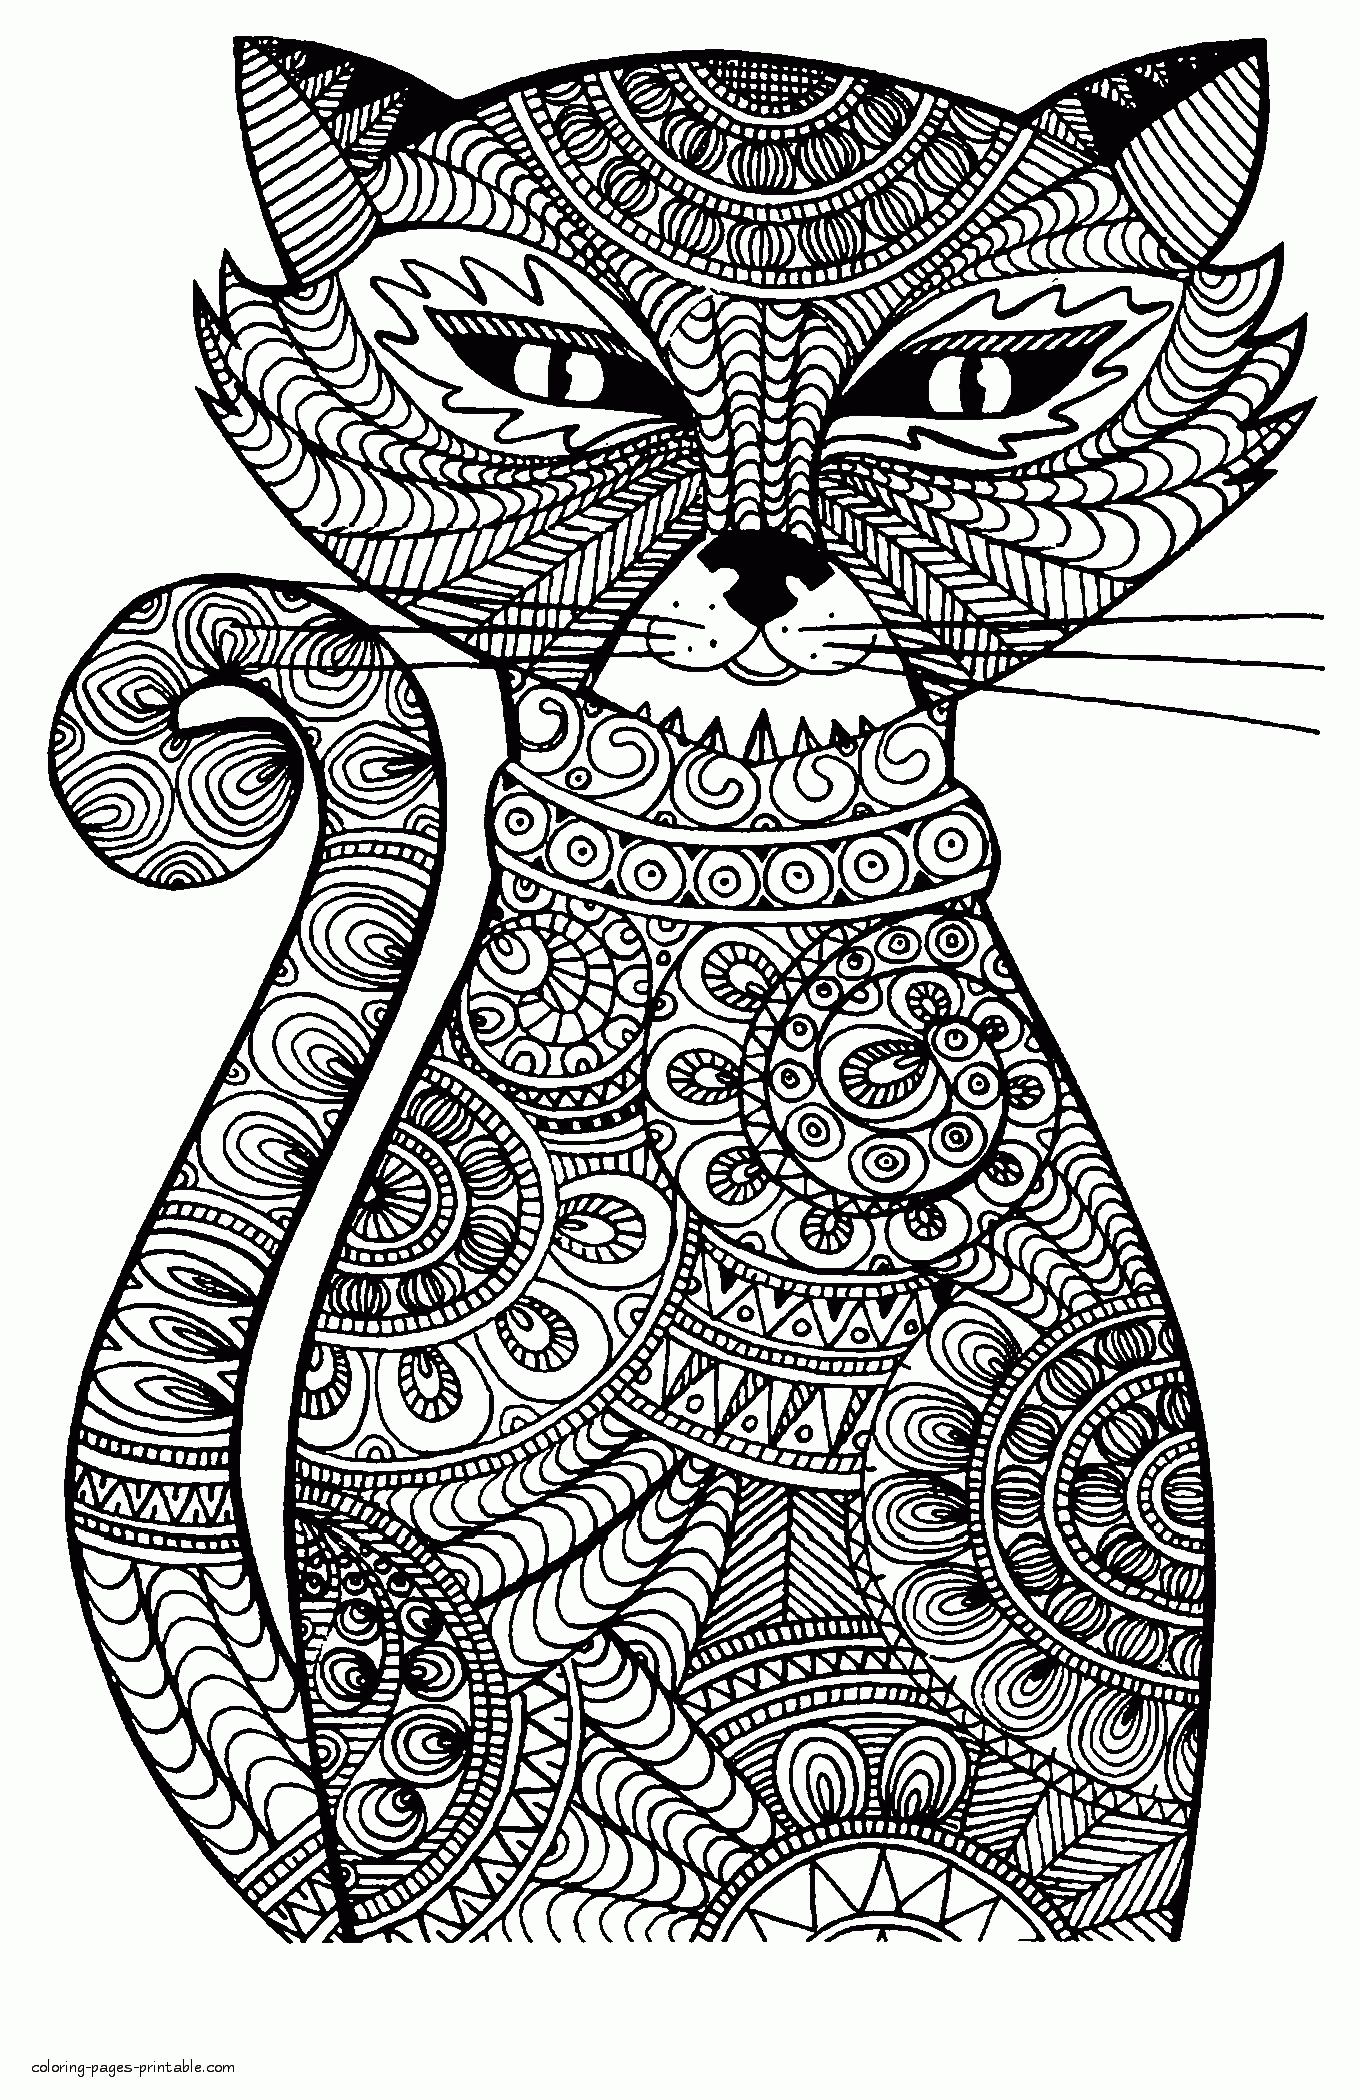 Printable Animal Coloring Pages For Adults || COLORING-PAGES-PRINTABLE.COM